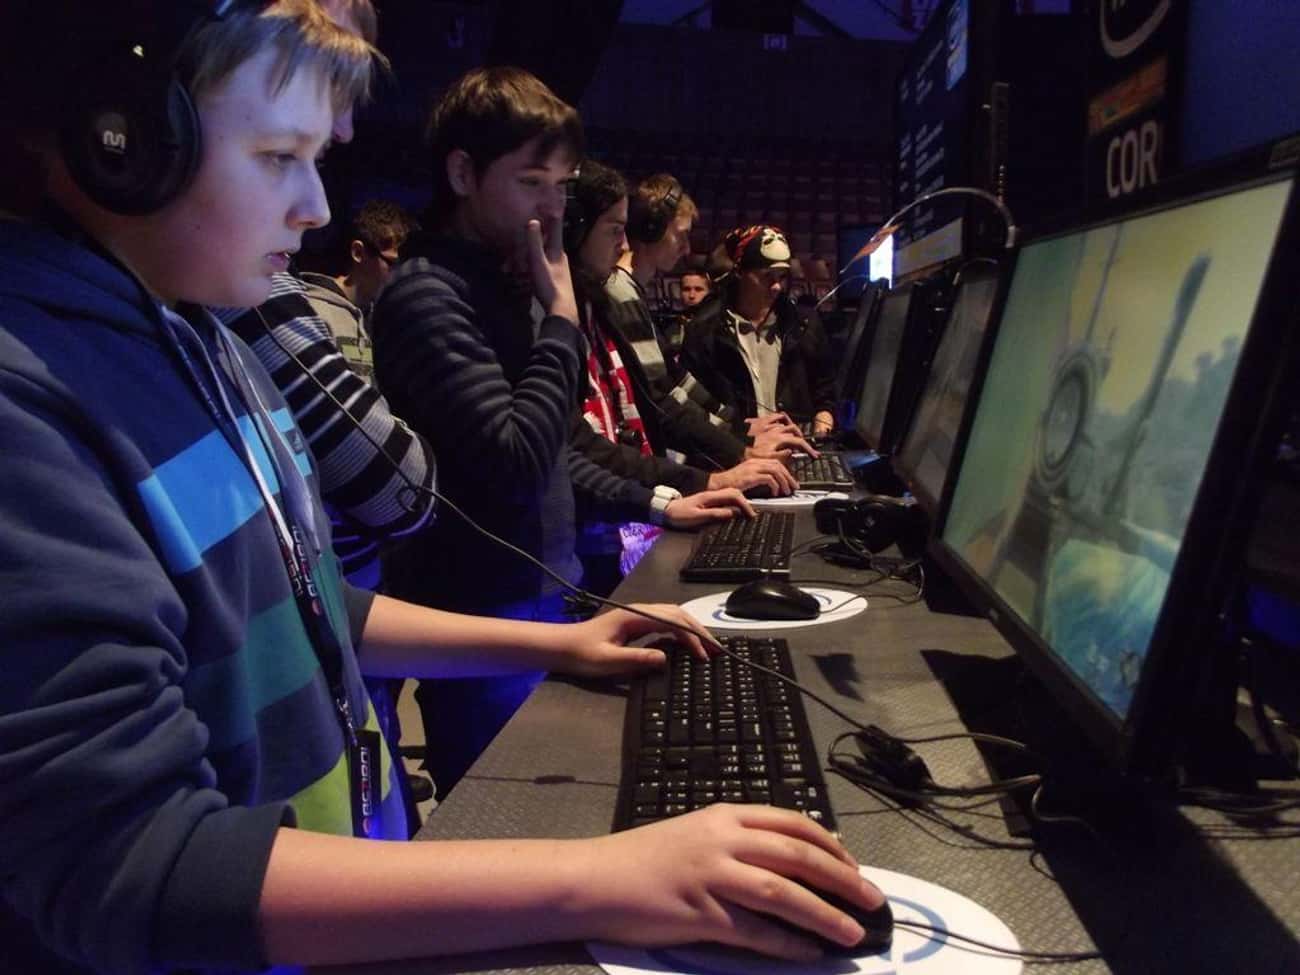 America May Have More Than 3 Million Gaming-Dependent Teens